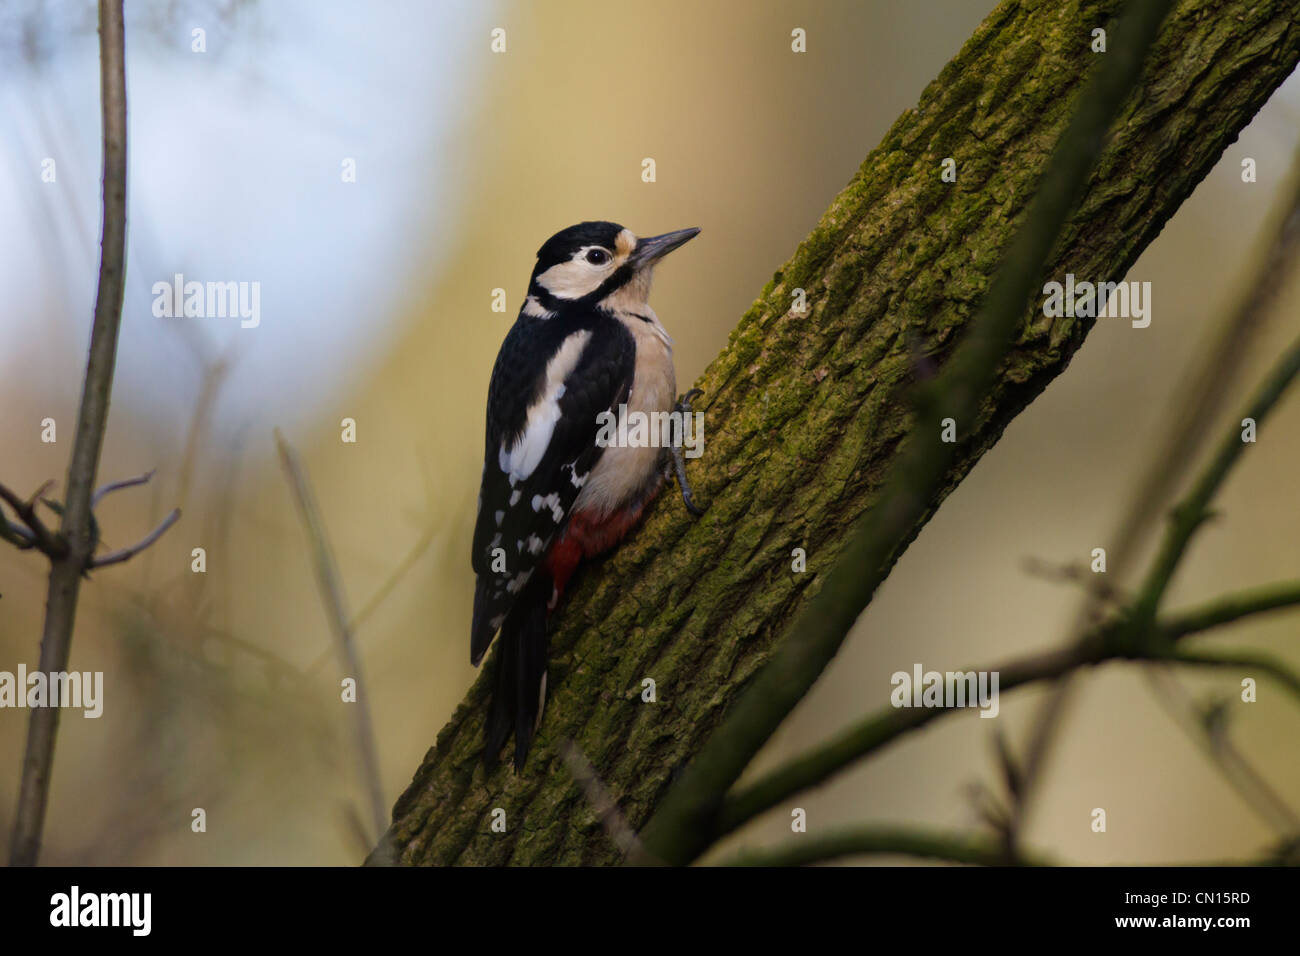 Great Spotted Woodpecker (Dendrocopos major) on branch Stock Photo